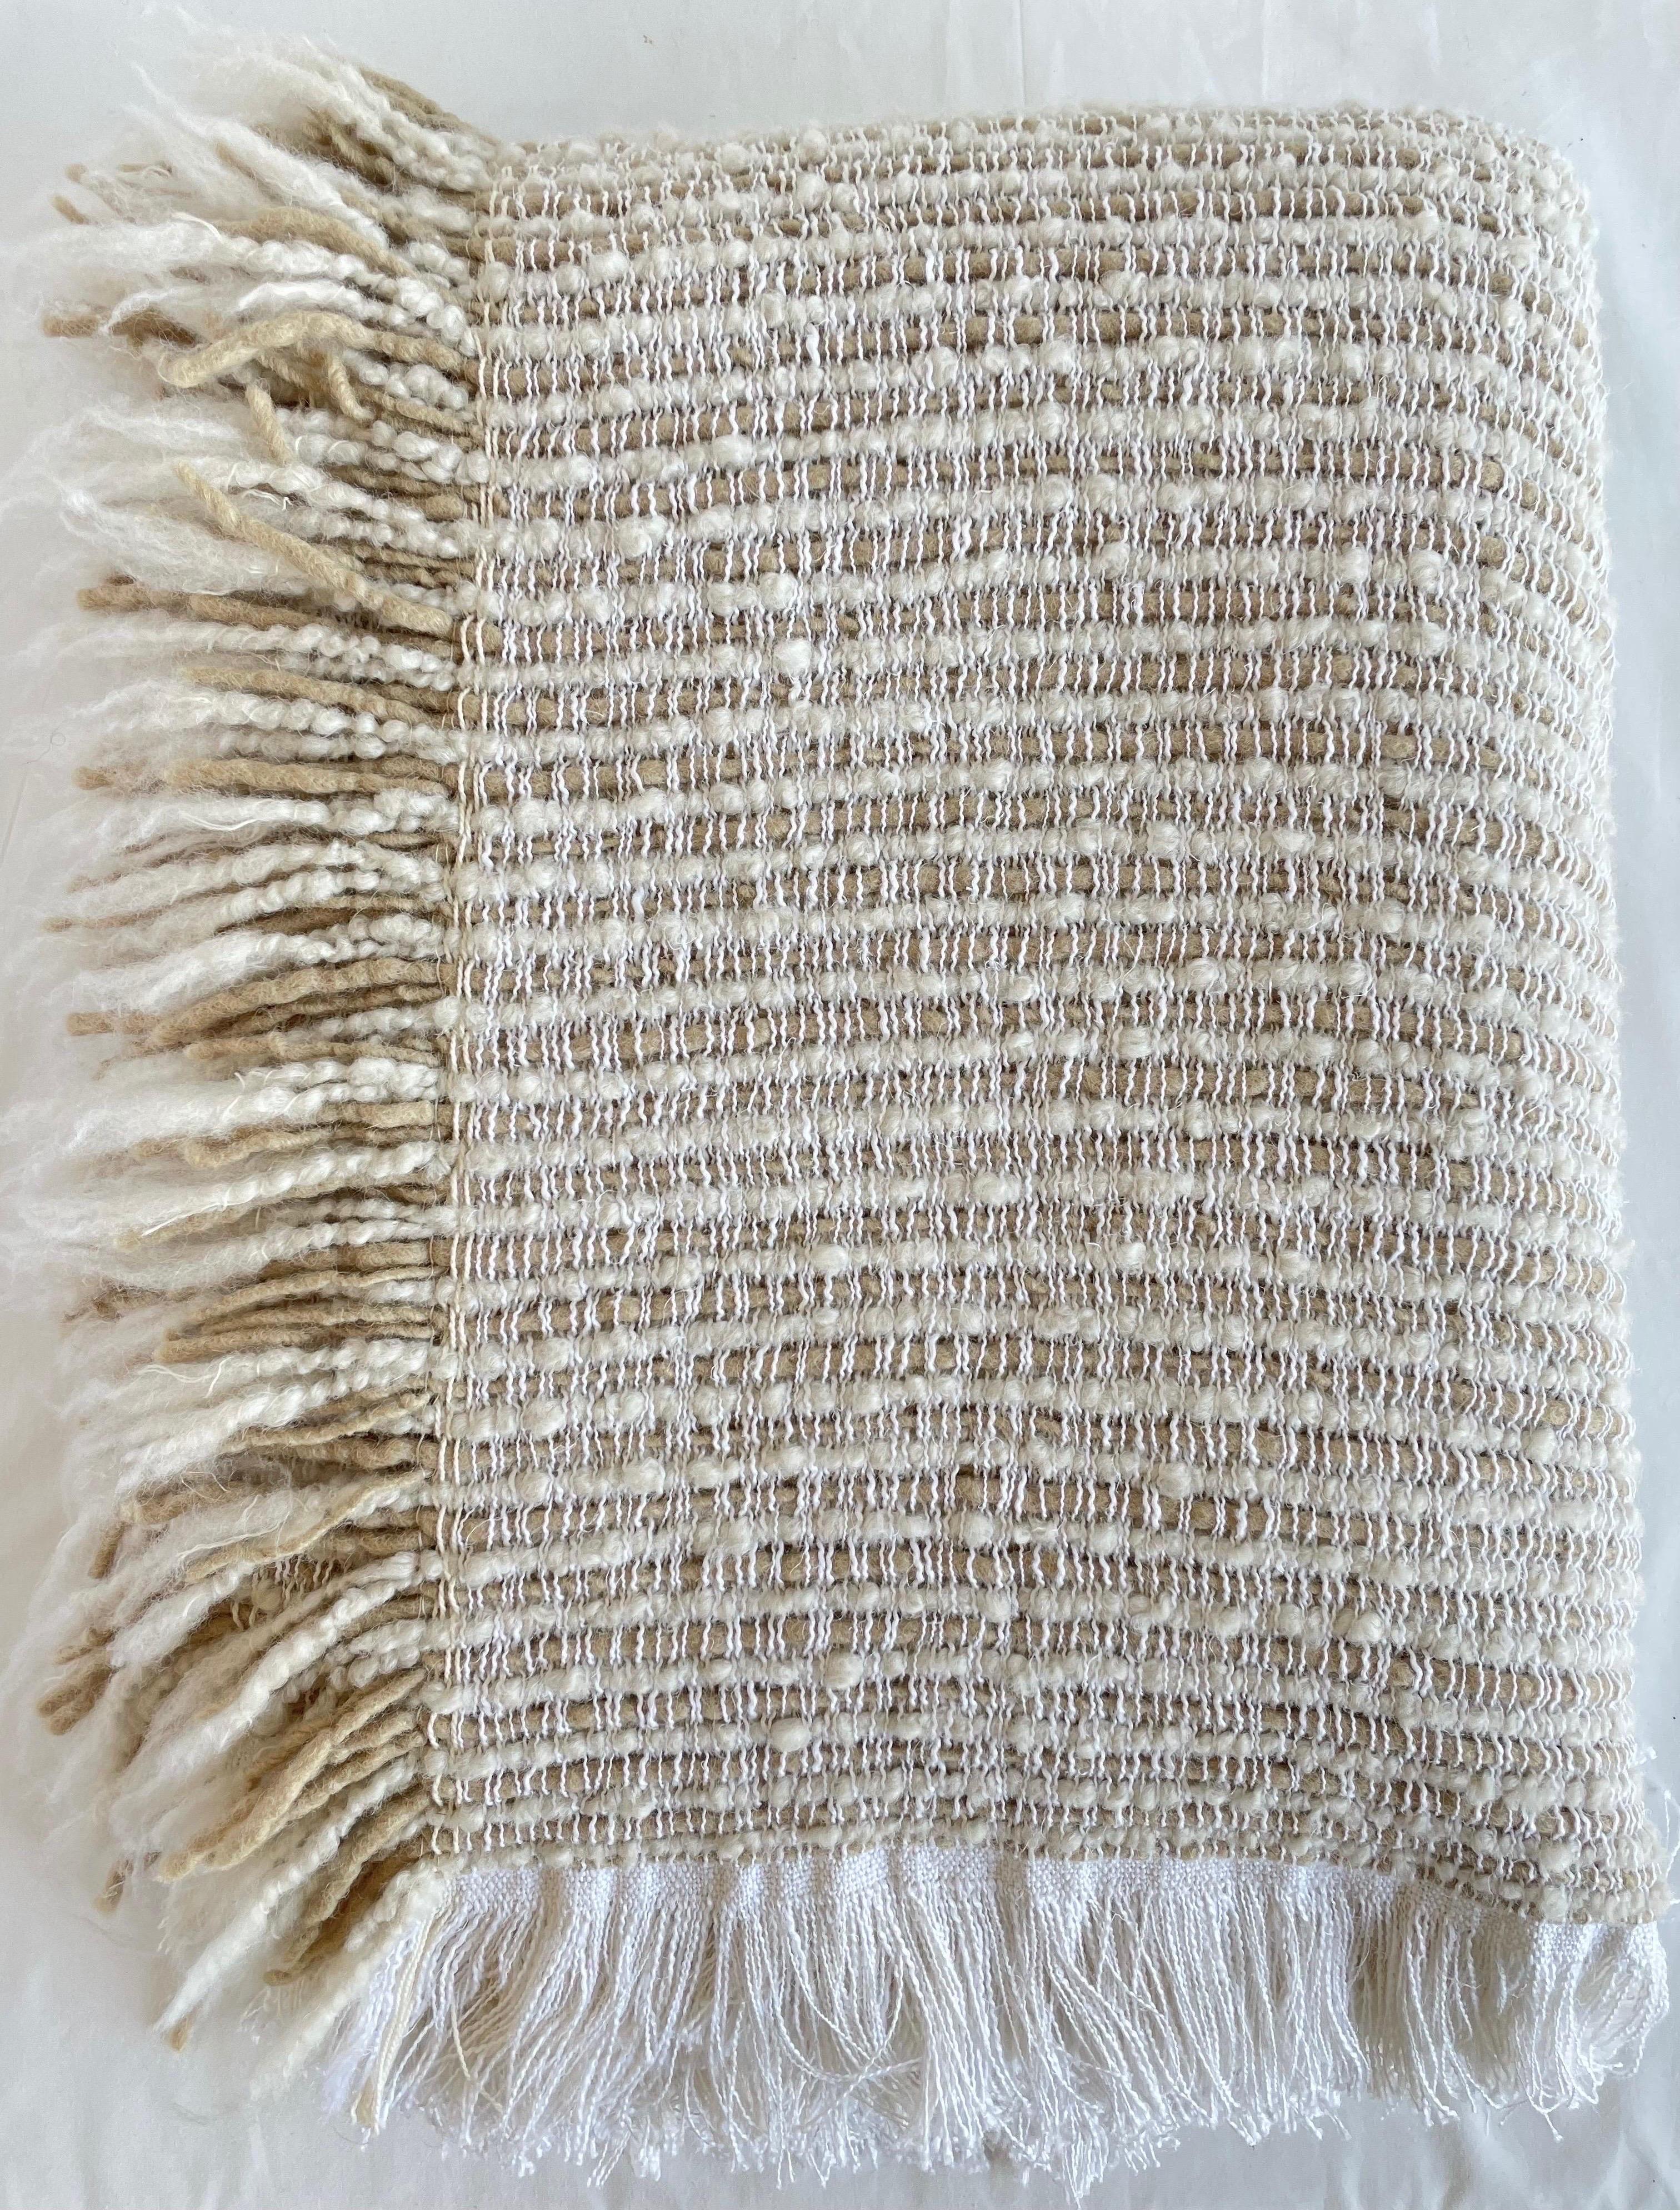 Woven in Belgium using traditional weaving techniques, Bloom Home Inc's Bulloch is a heavyweight throw that features an incredibly bulky and textural Wool/ Alpaca Yarn on a white Belgian linen warp. If this item is out of stock please allow 2-3